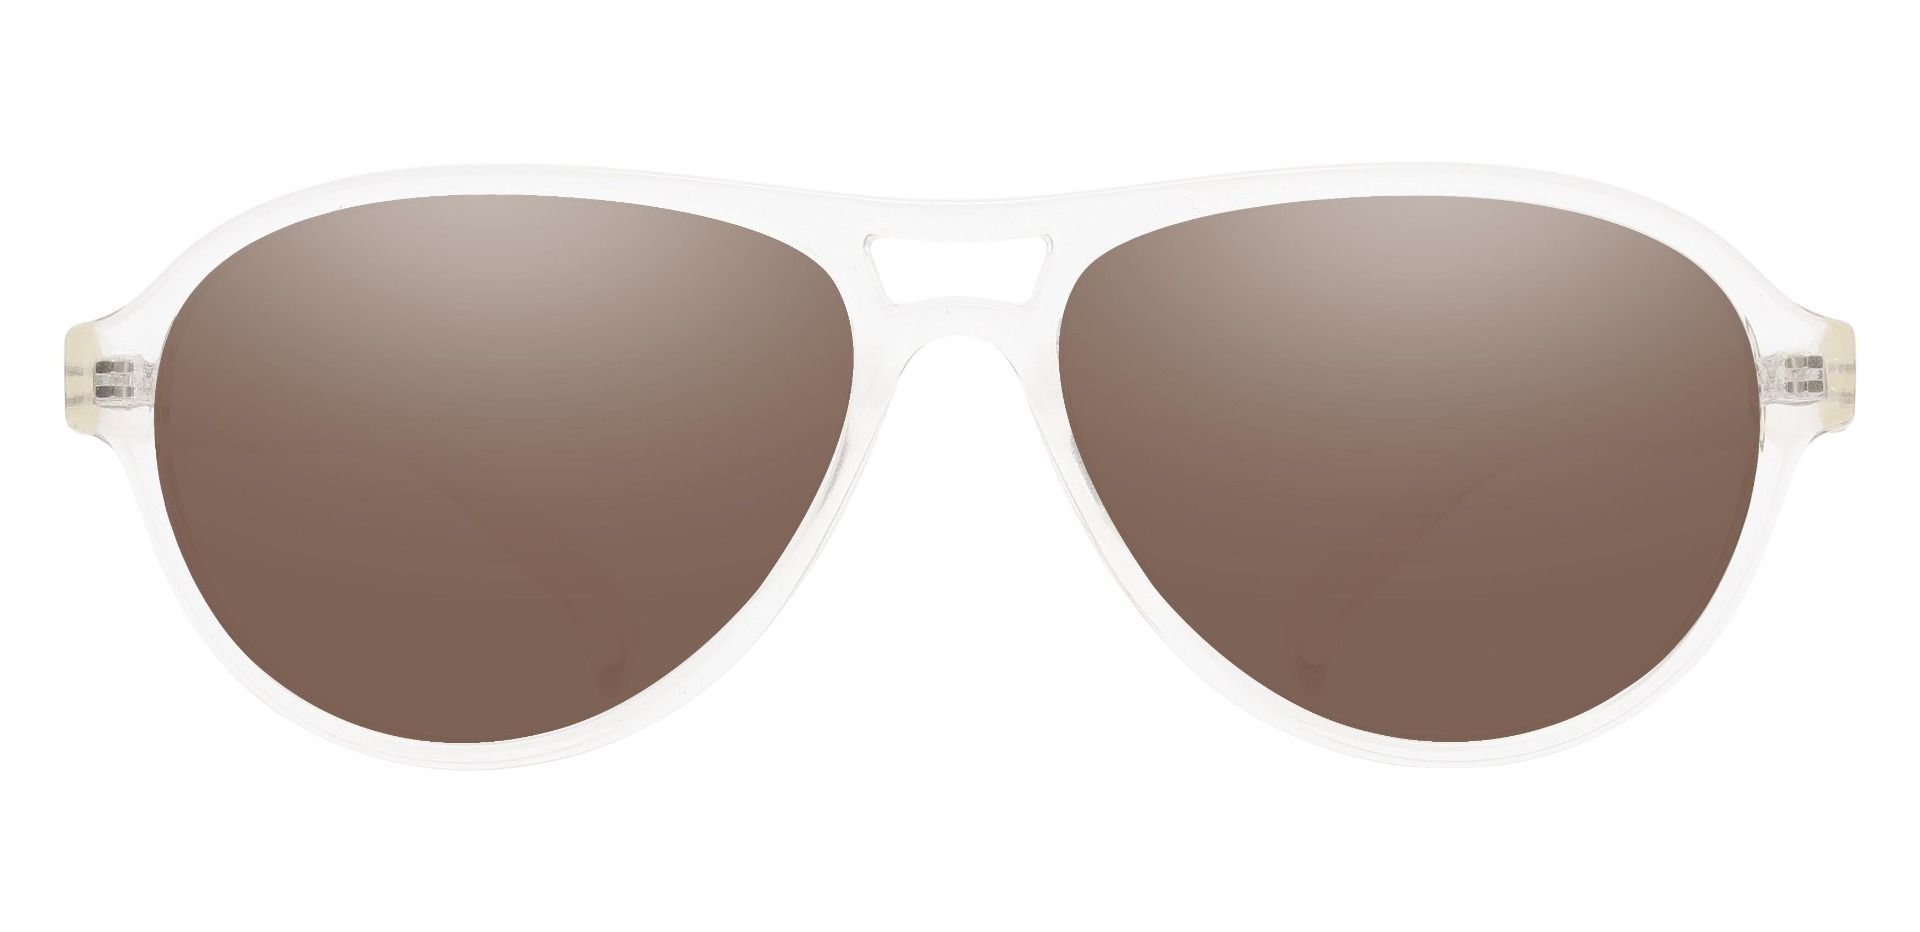 Cinema Aviator Reading Sunglasses - Clear Frame With Brown Lenses